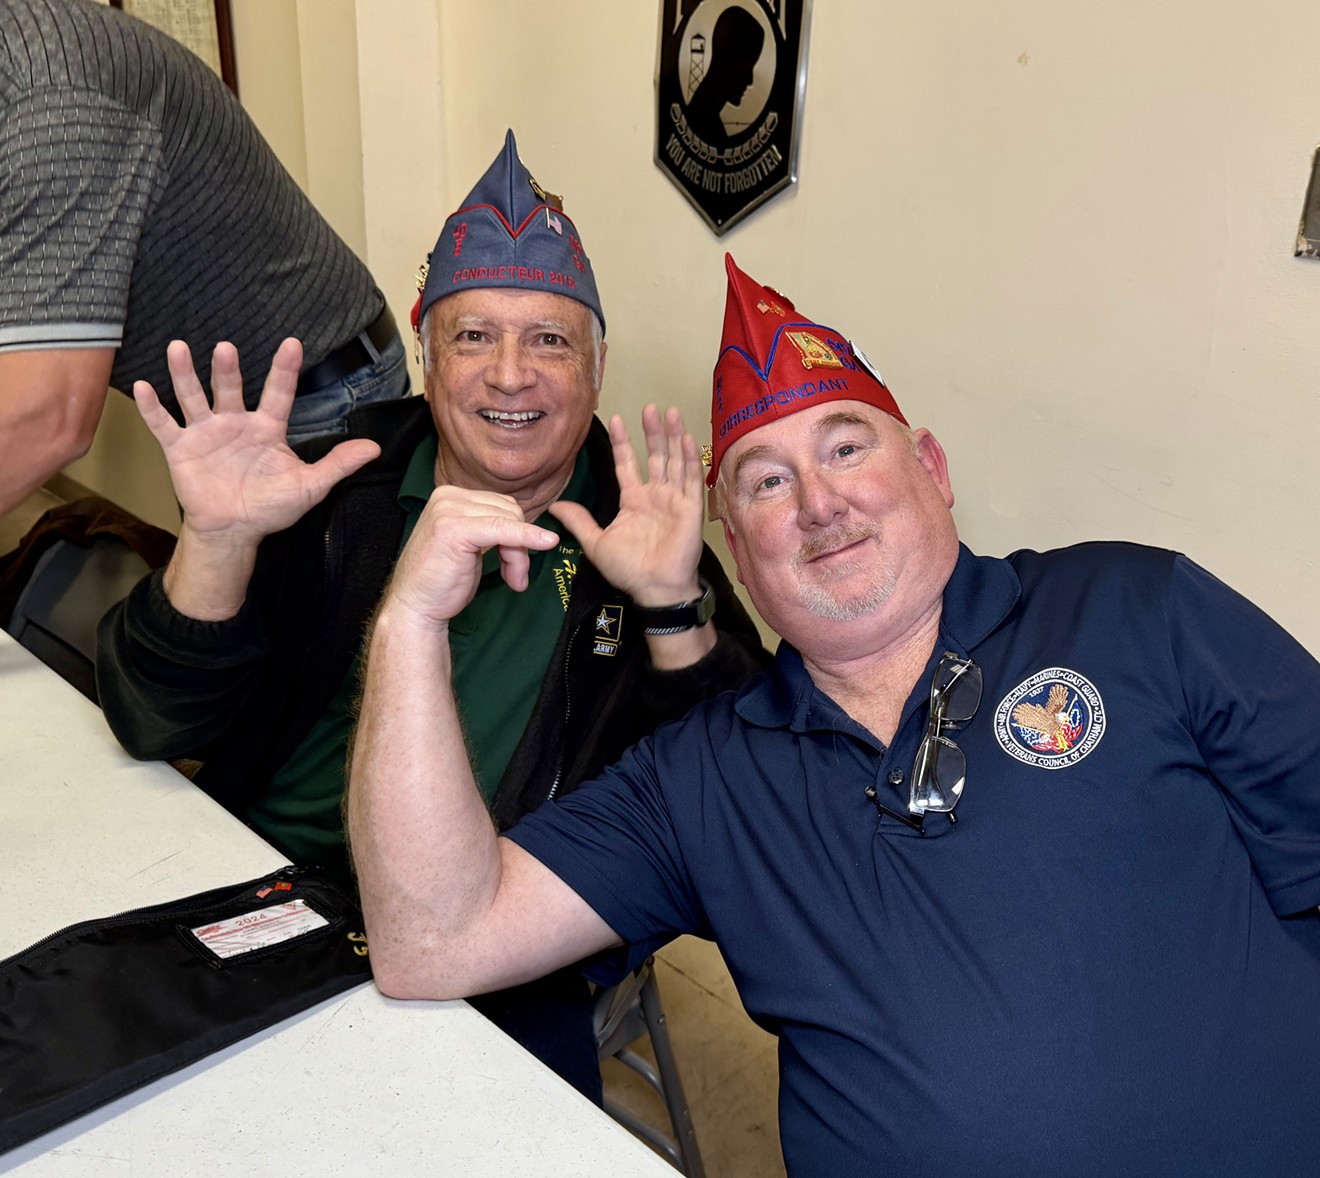 Veterans Council of Chatham County December Meeting